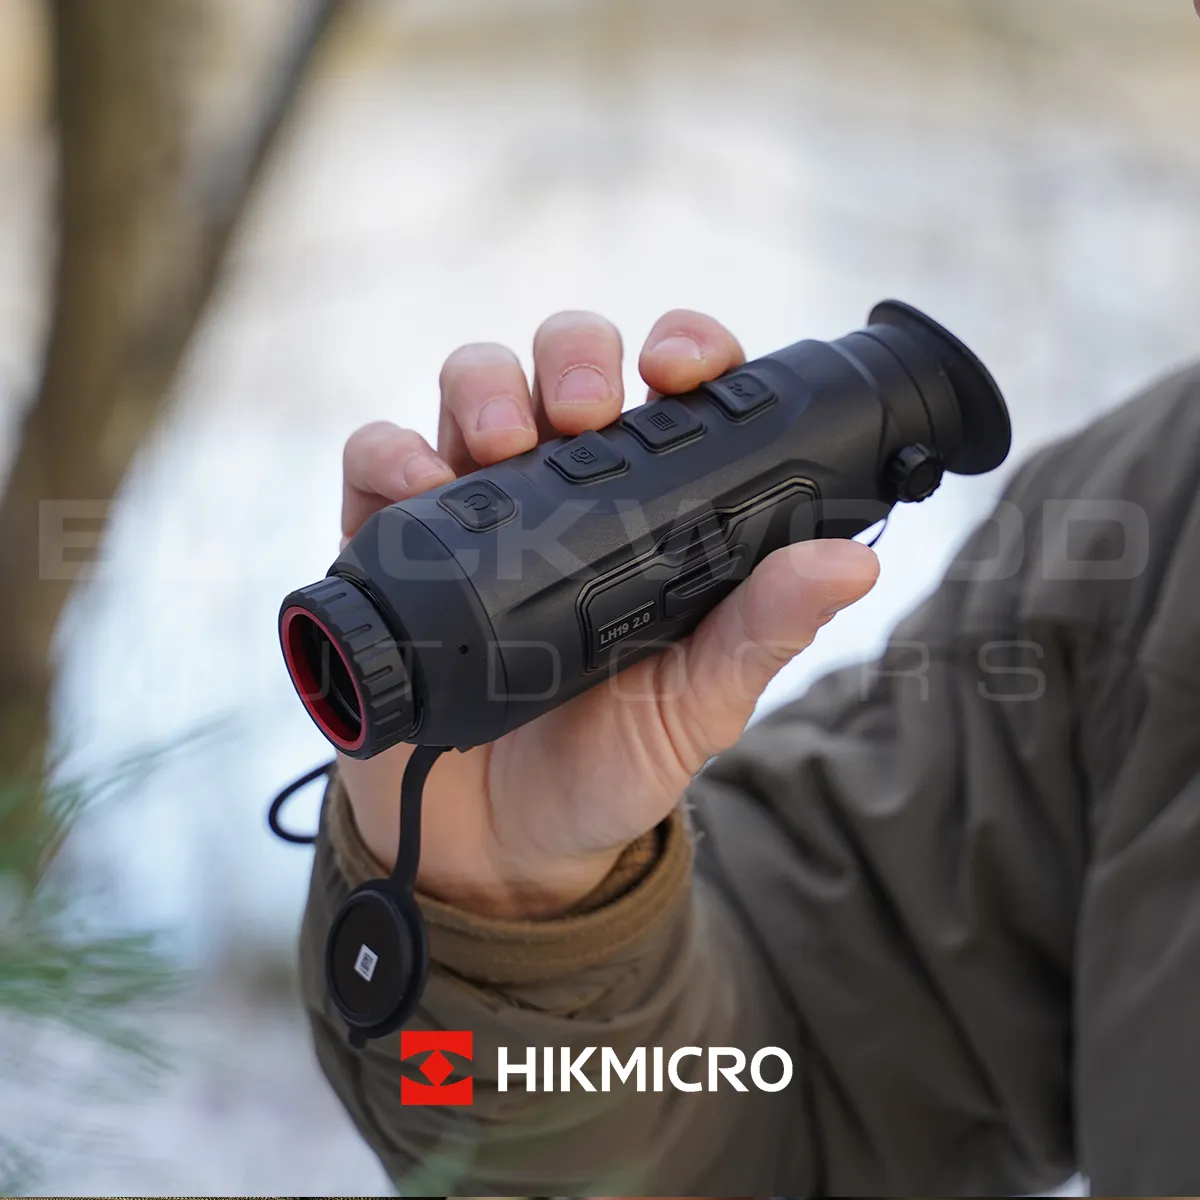 HikMicro Lynx 2.0 Thermal Monocular available in LH15 , LH19 and LH25 models